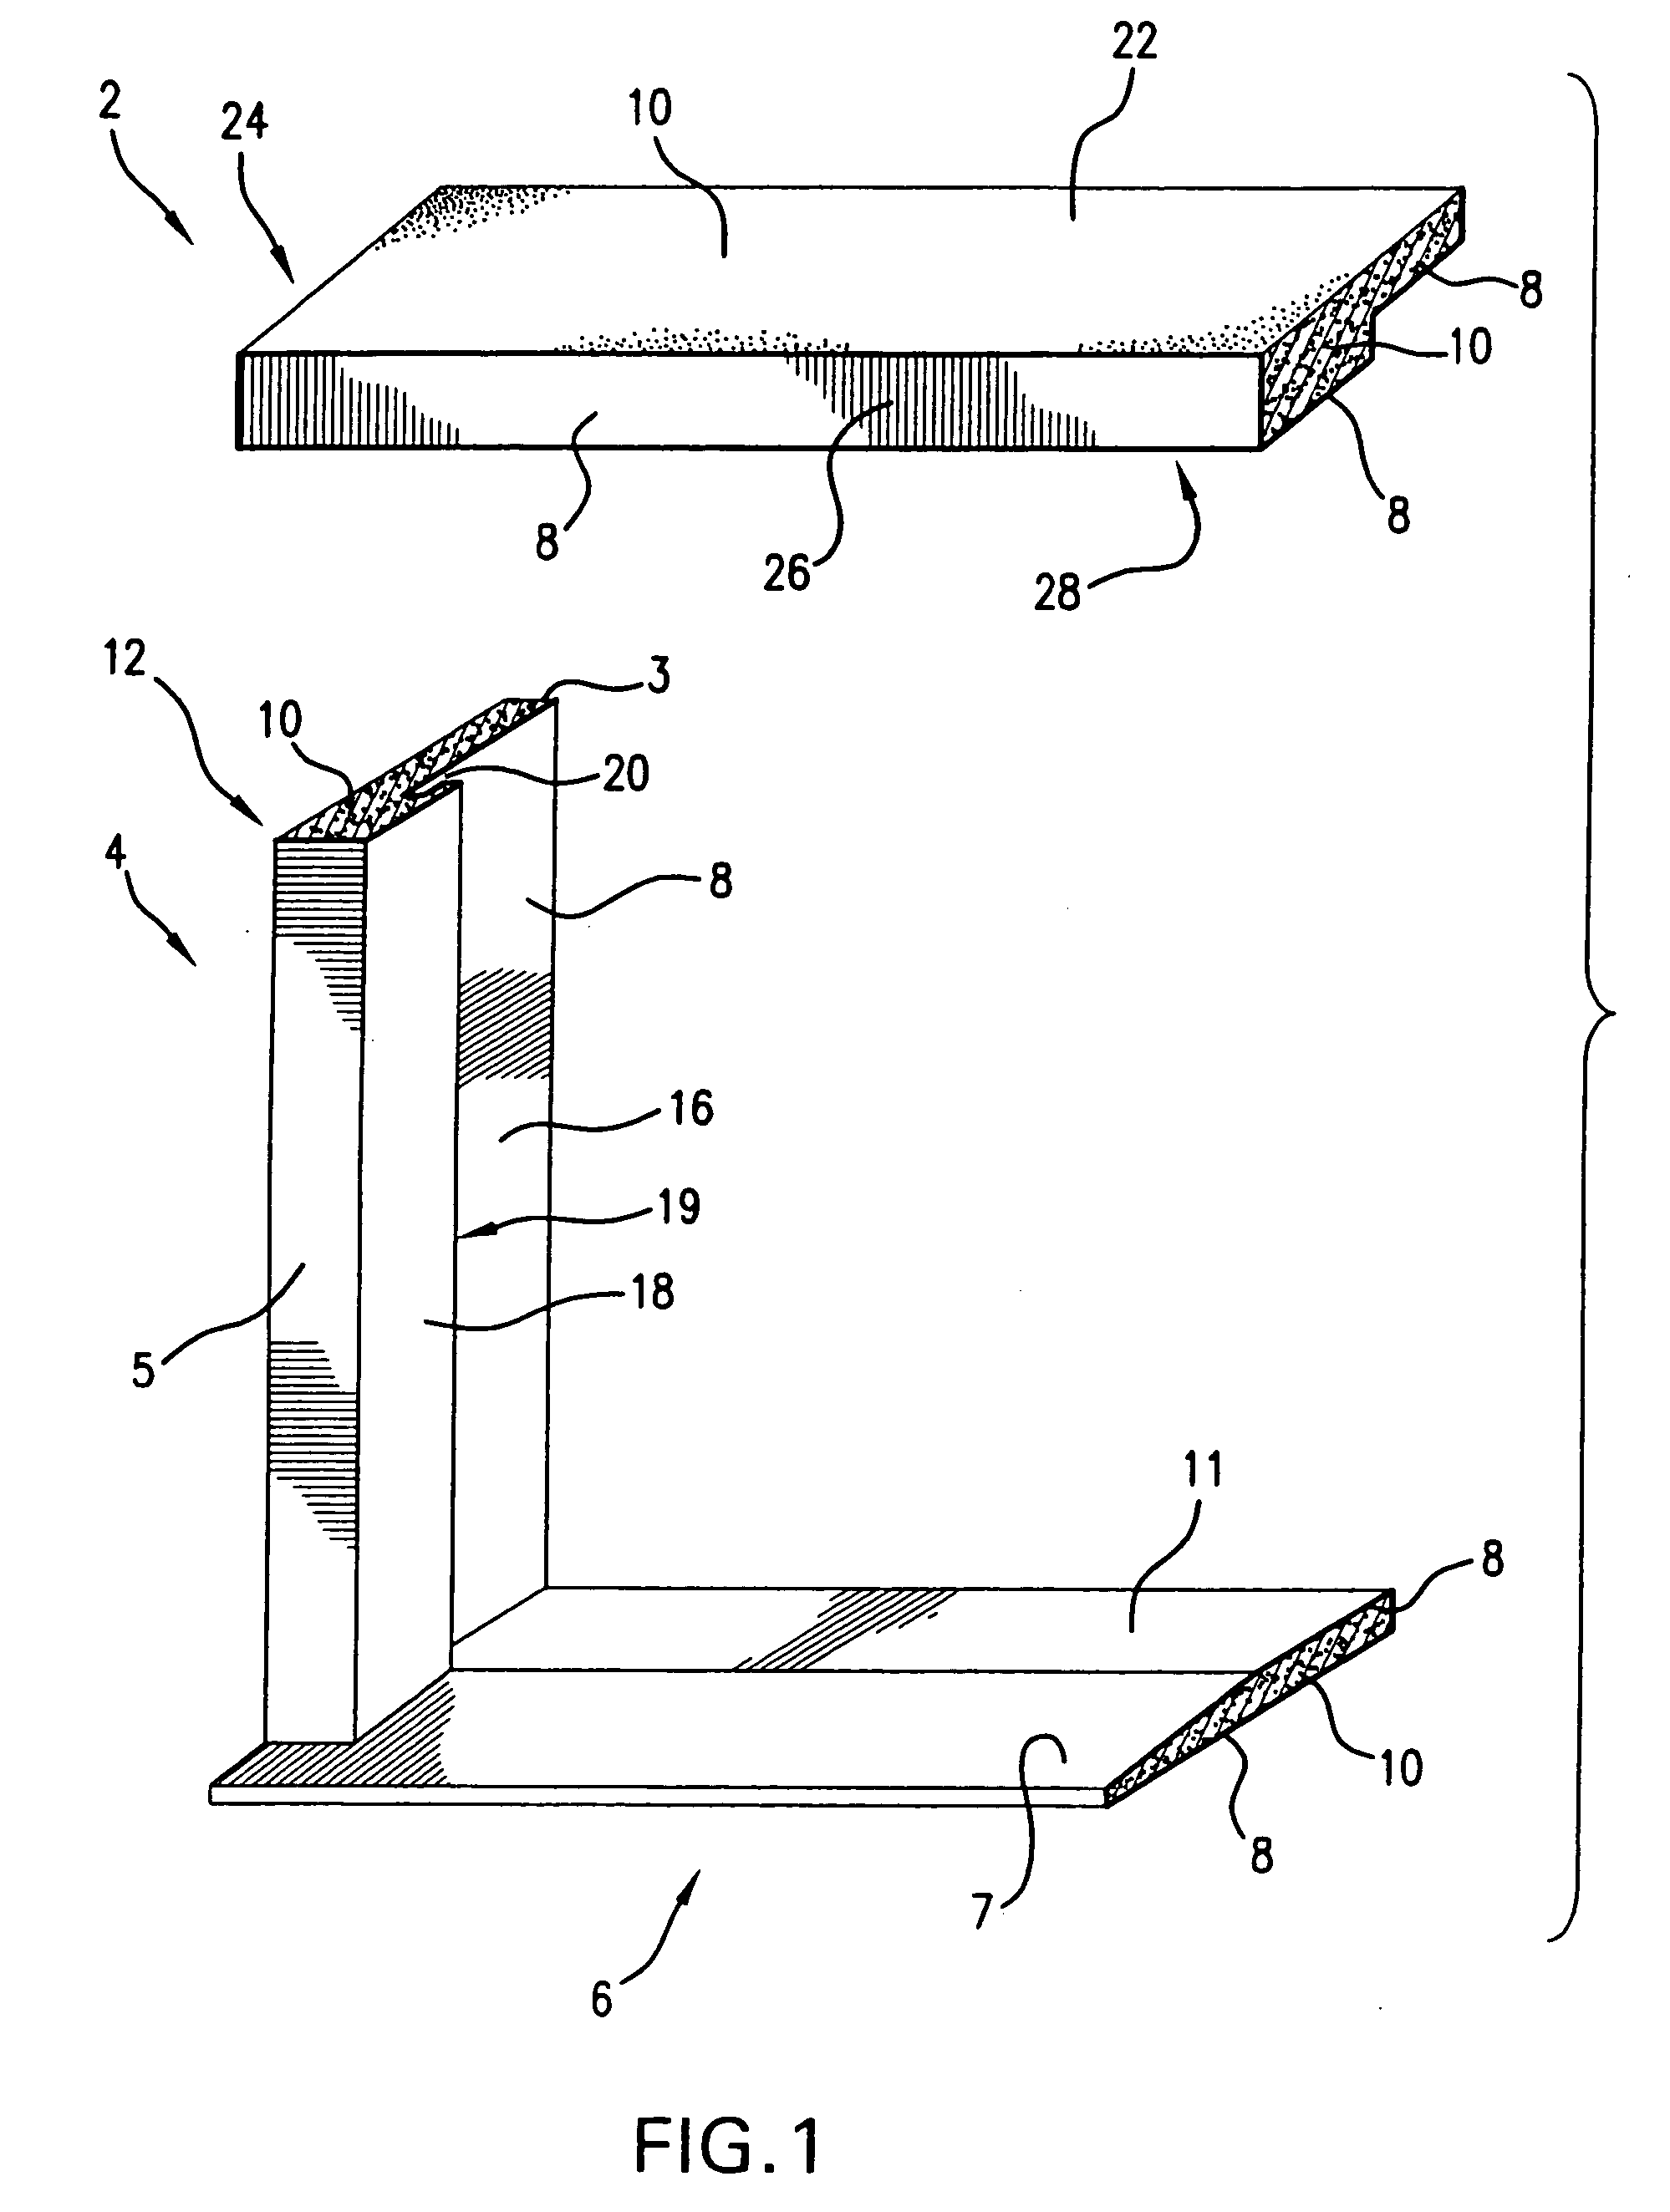 Molded polymeric structural members and compositions and methods for making them